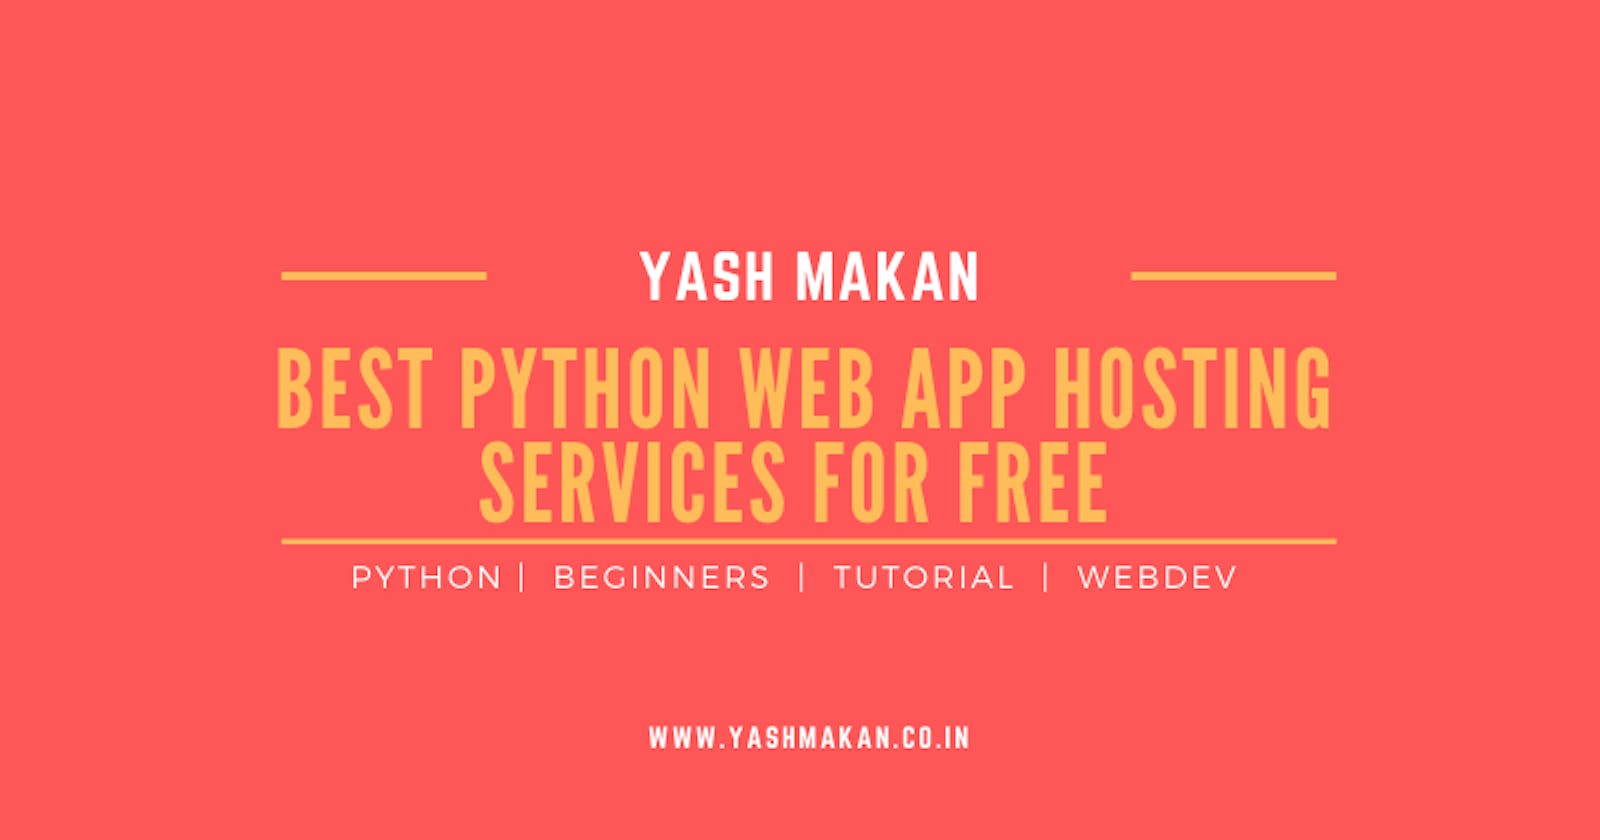 4 best python web app hosting services for free(with the complete process)